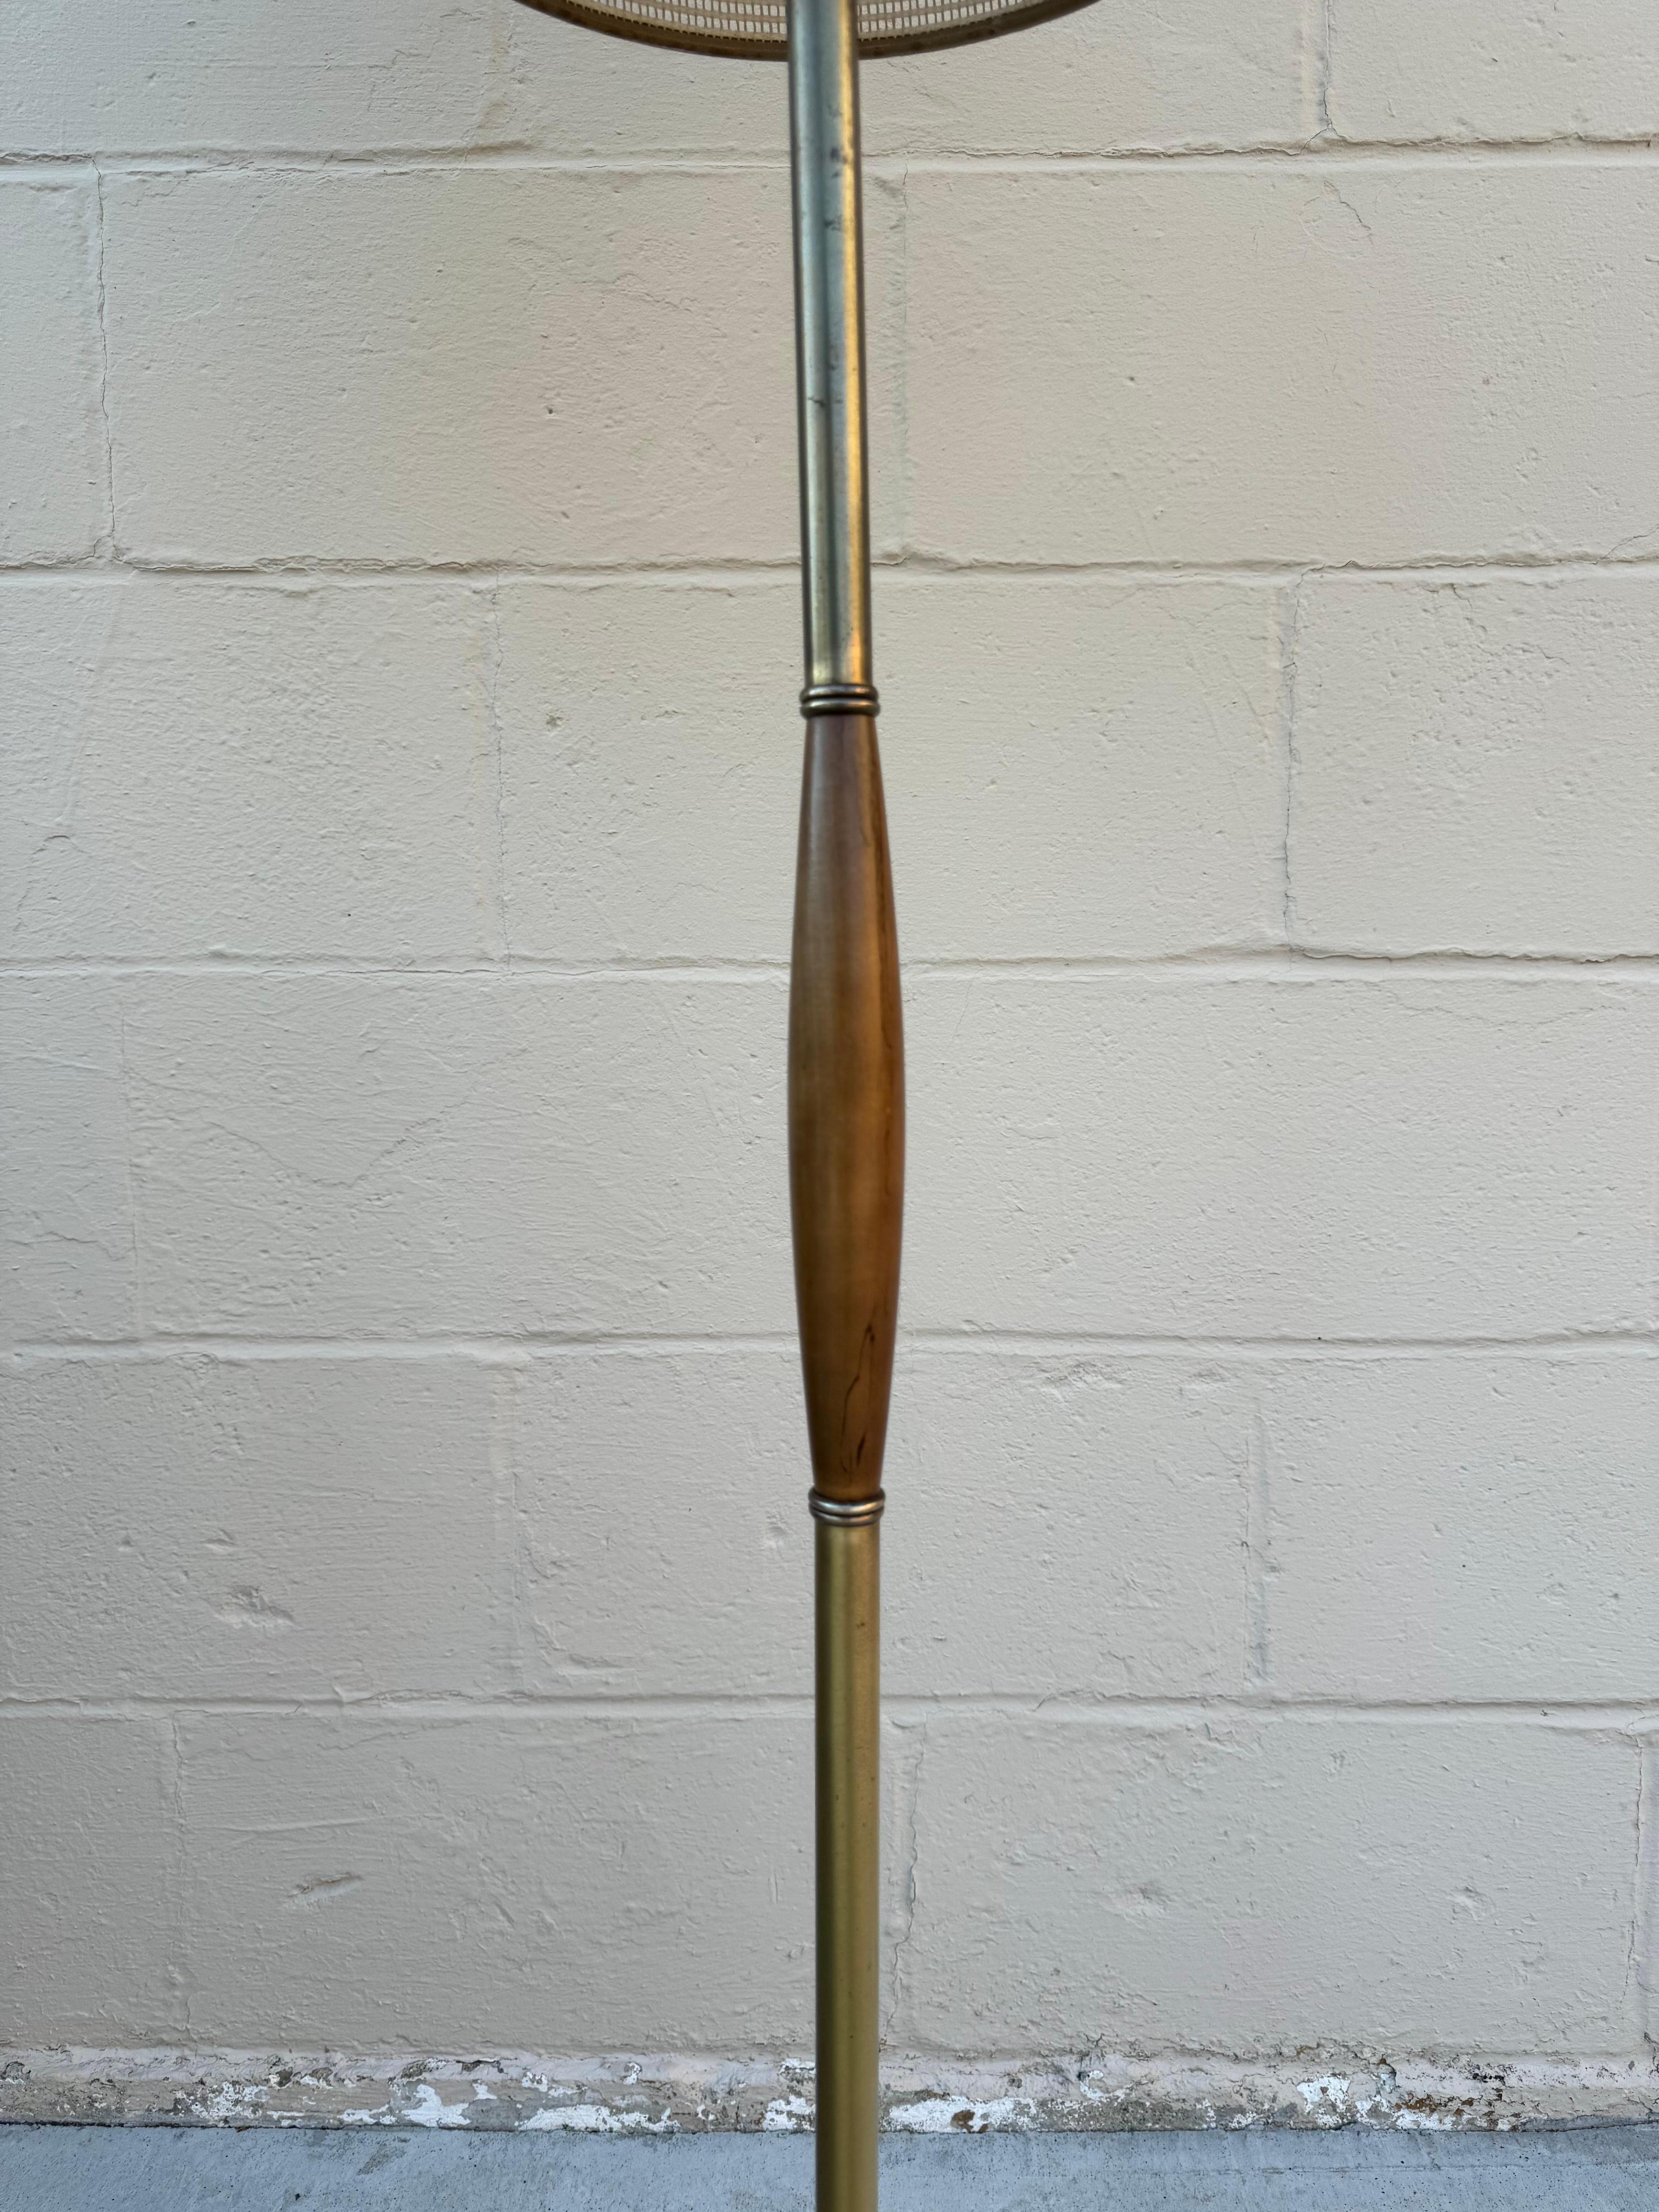 For sale we have a gorgeous mid century modern floor brass floor lamp with wood accent. This floor lamp is finished with a beautiful fiberglass double drum shade.

This mid century modern floor lamp is in excellent working condition and in sound